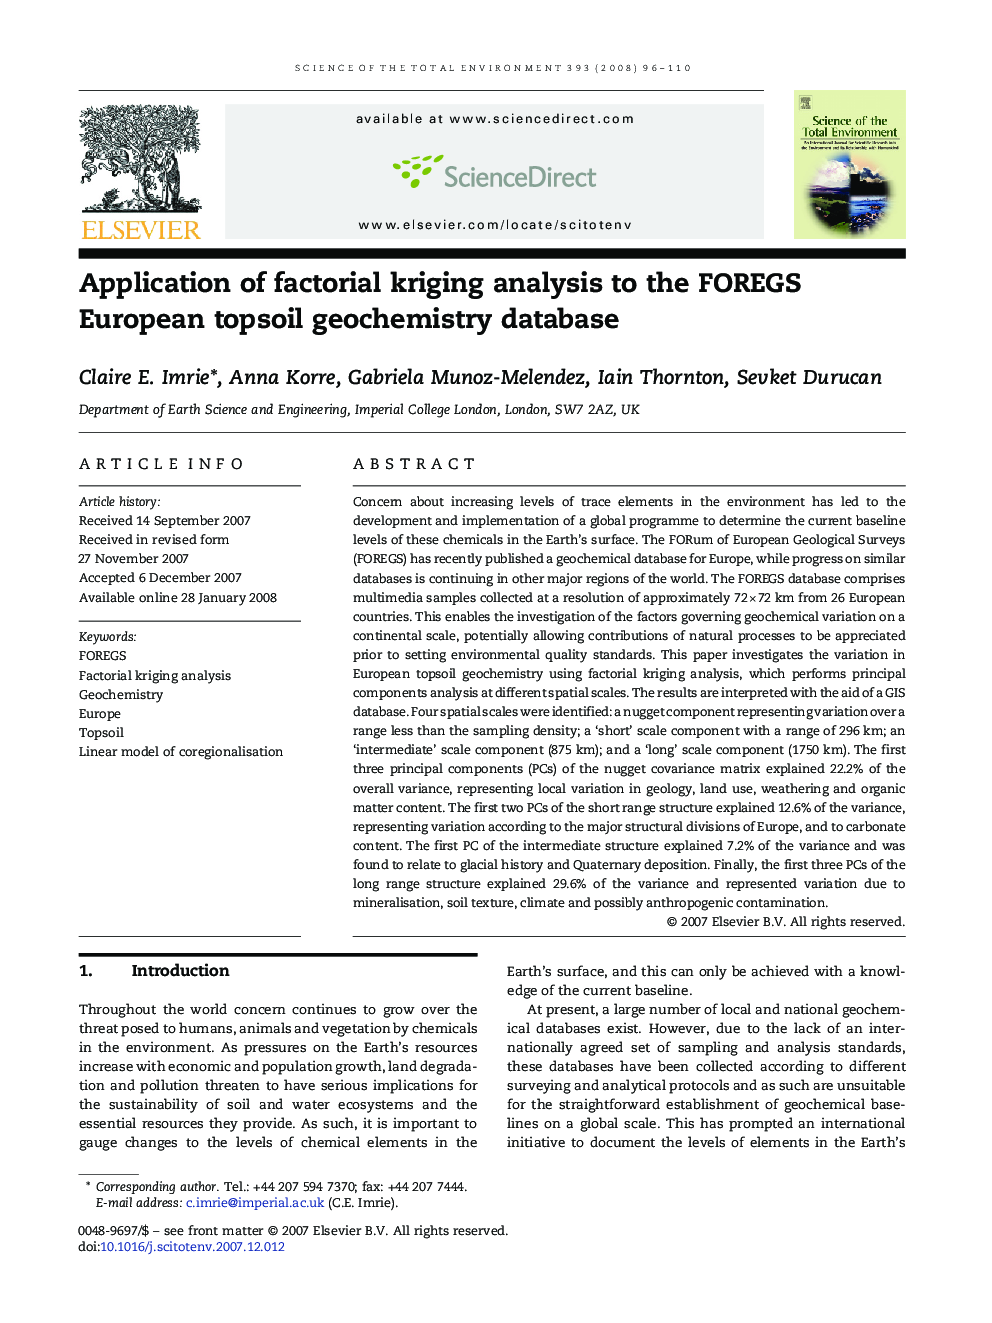 Application of factorial kriging analysis to the FOREGS European topsoil geochemistry database